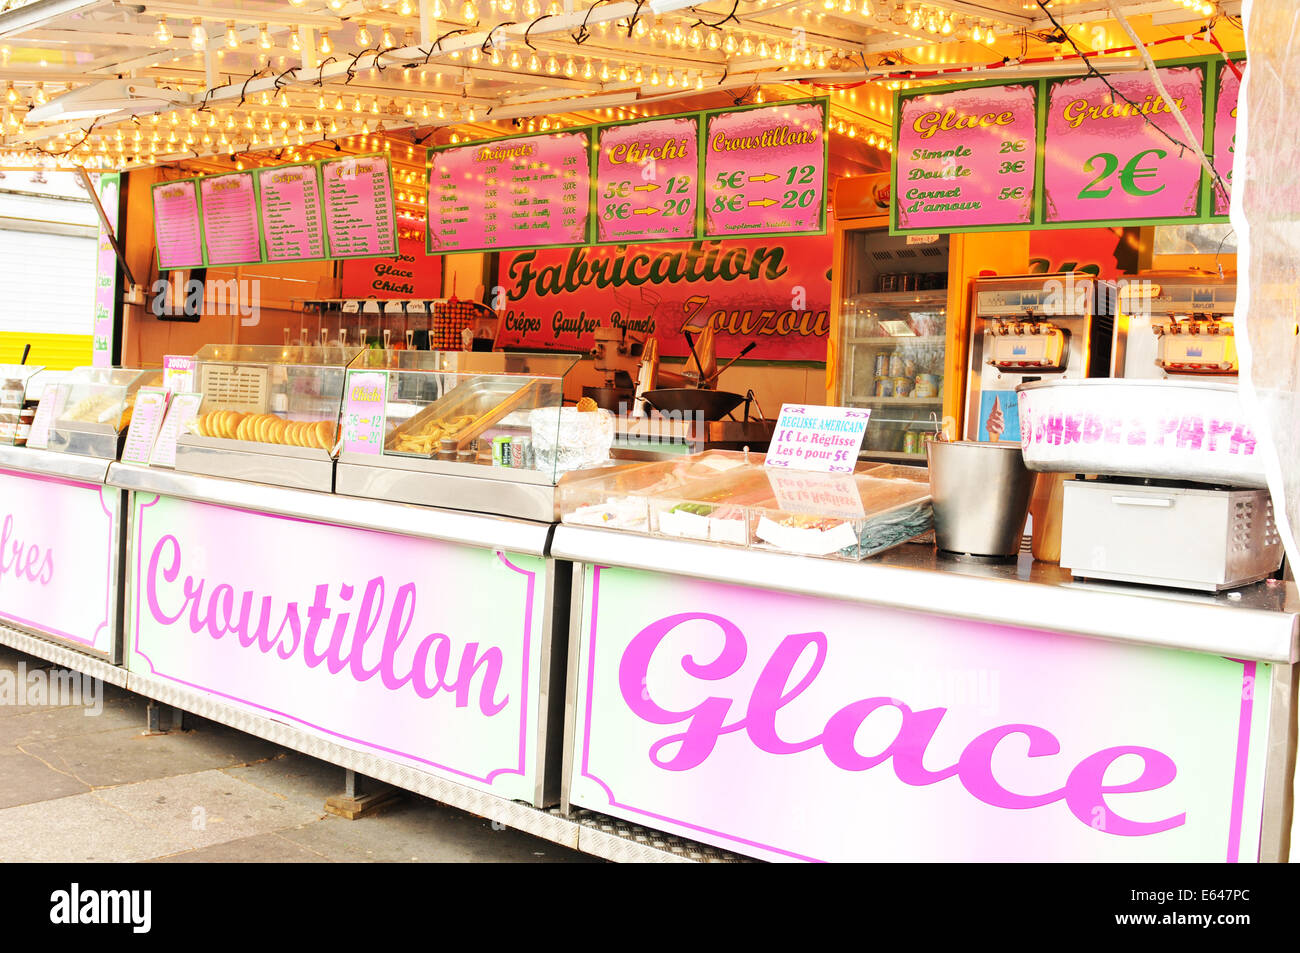 PARIS, FRANCE - MARCH 29, 2011: Traditional ice cream and crepe kiosk in central Paris. Stock Photo